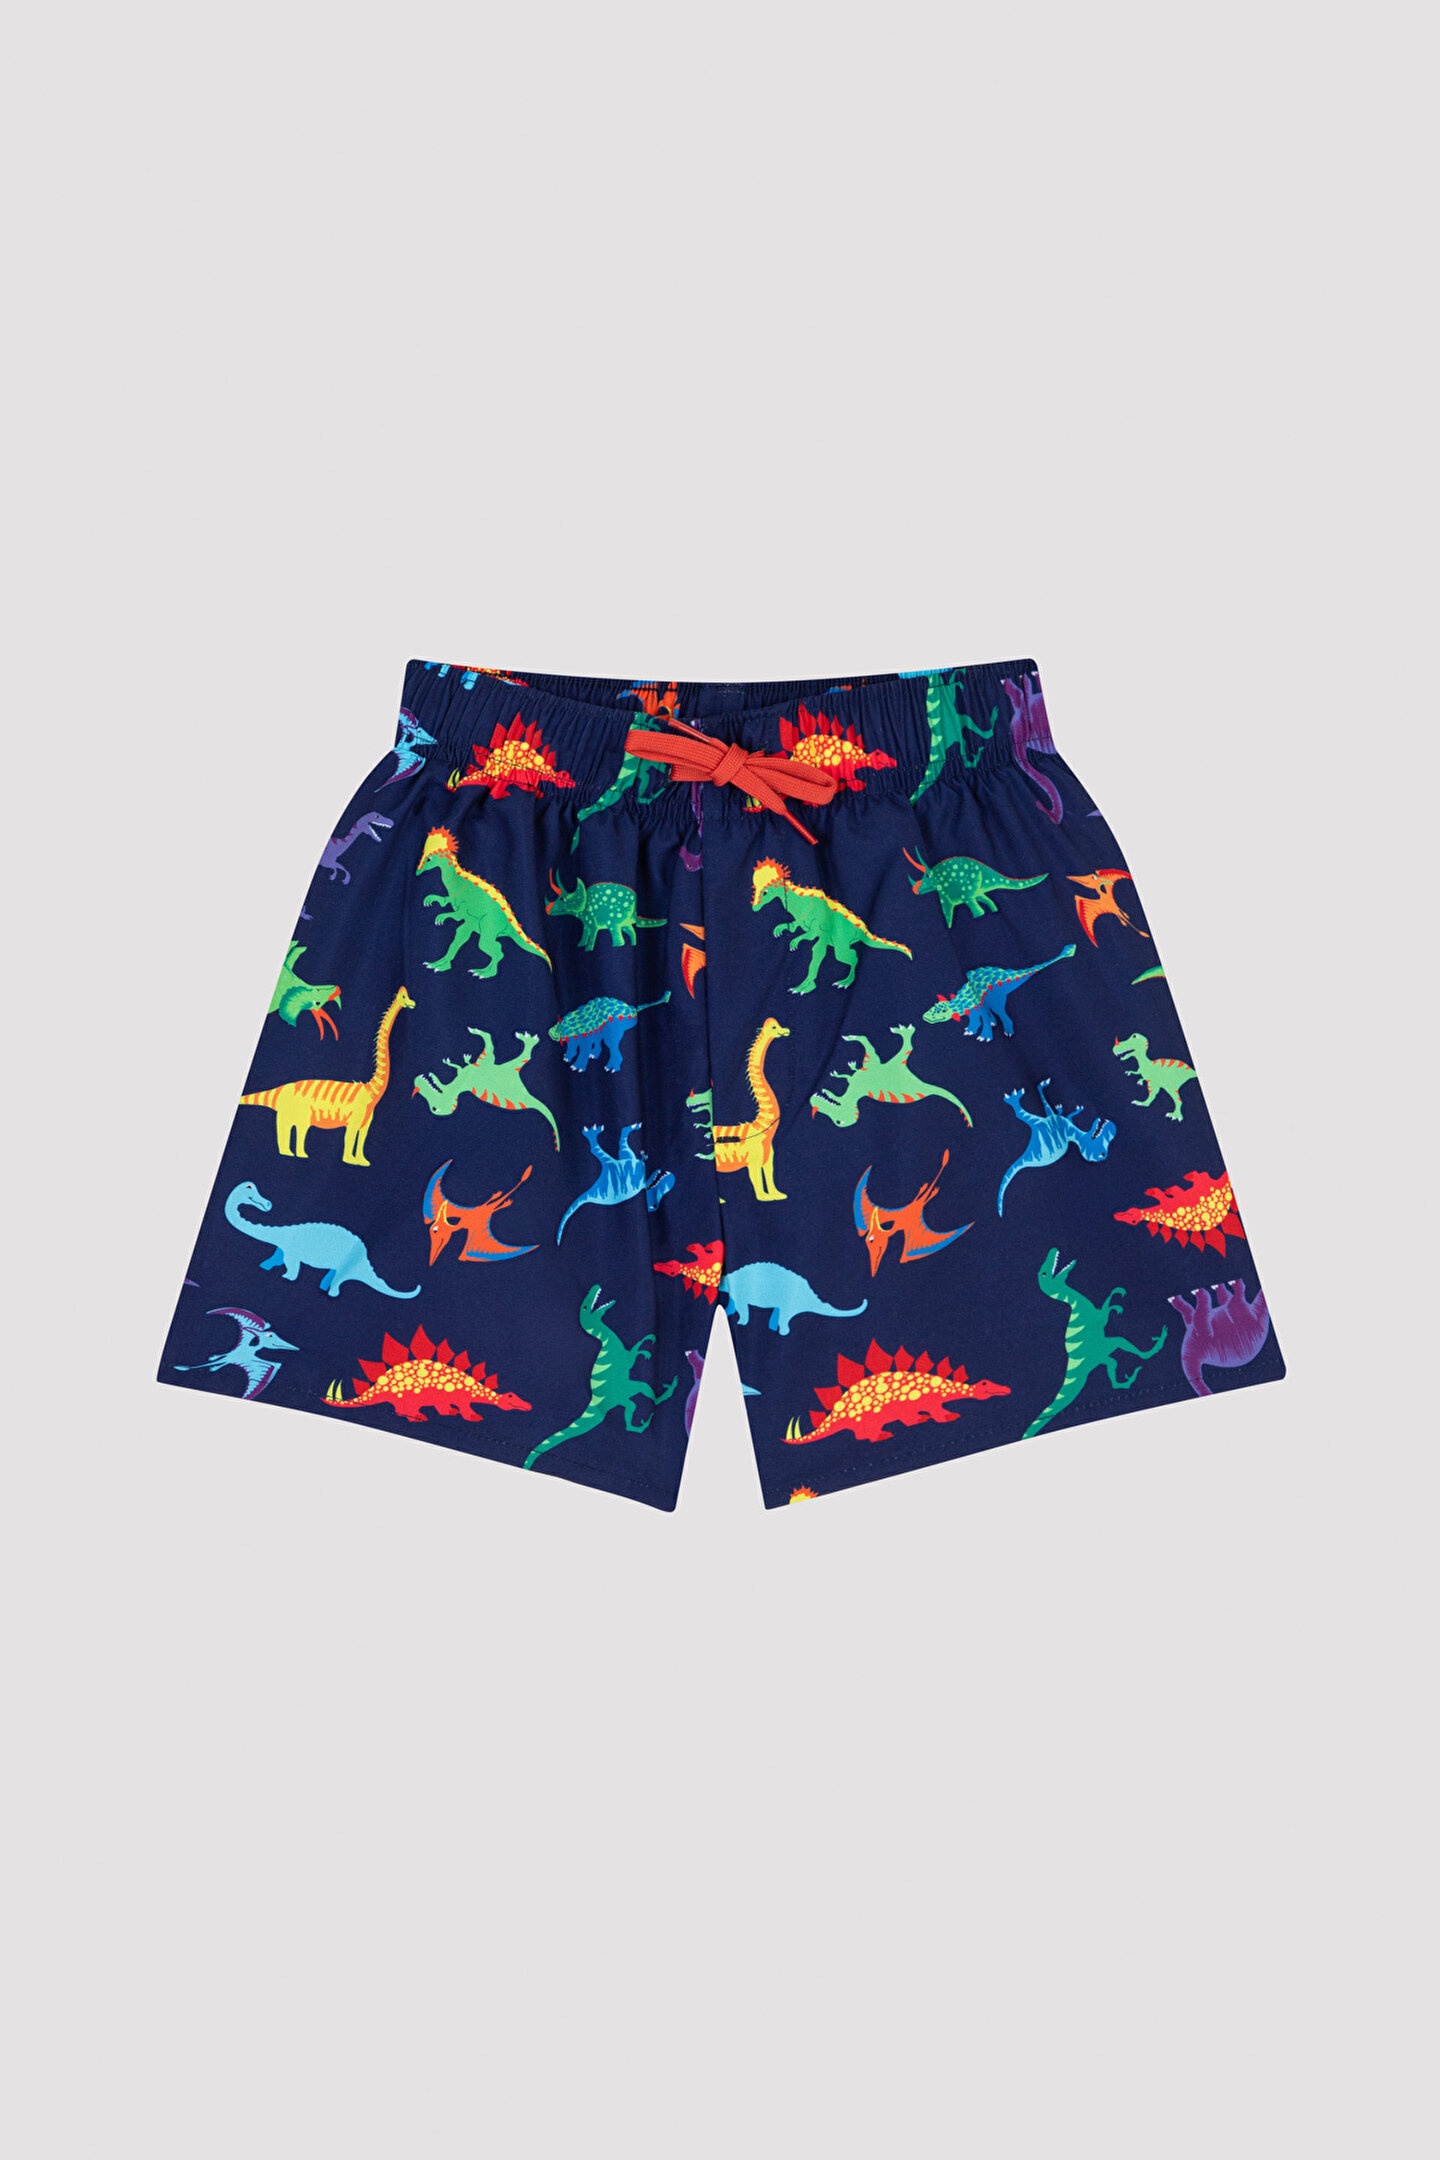 Boys Colorfull Dino Suit - 1